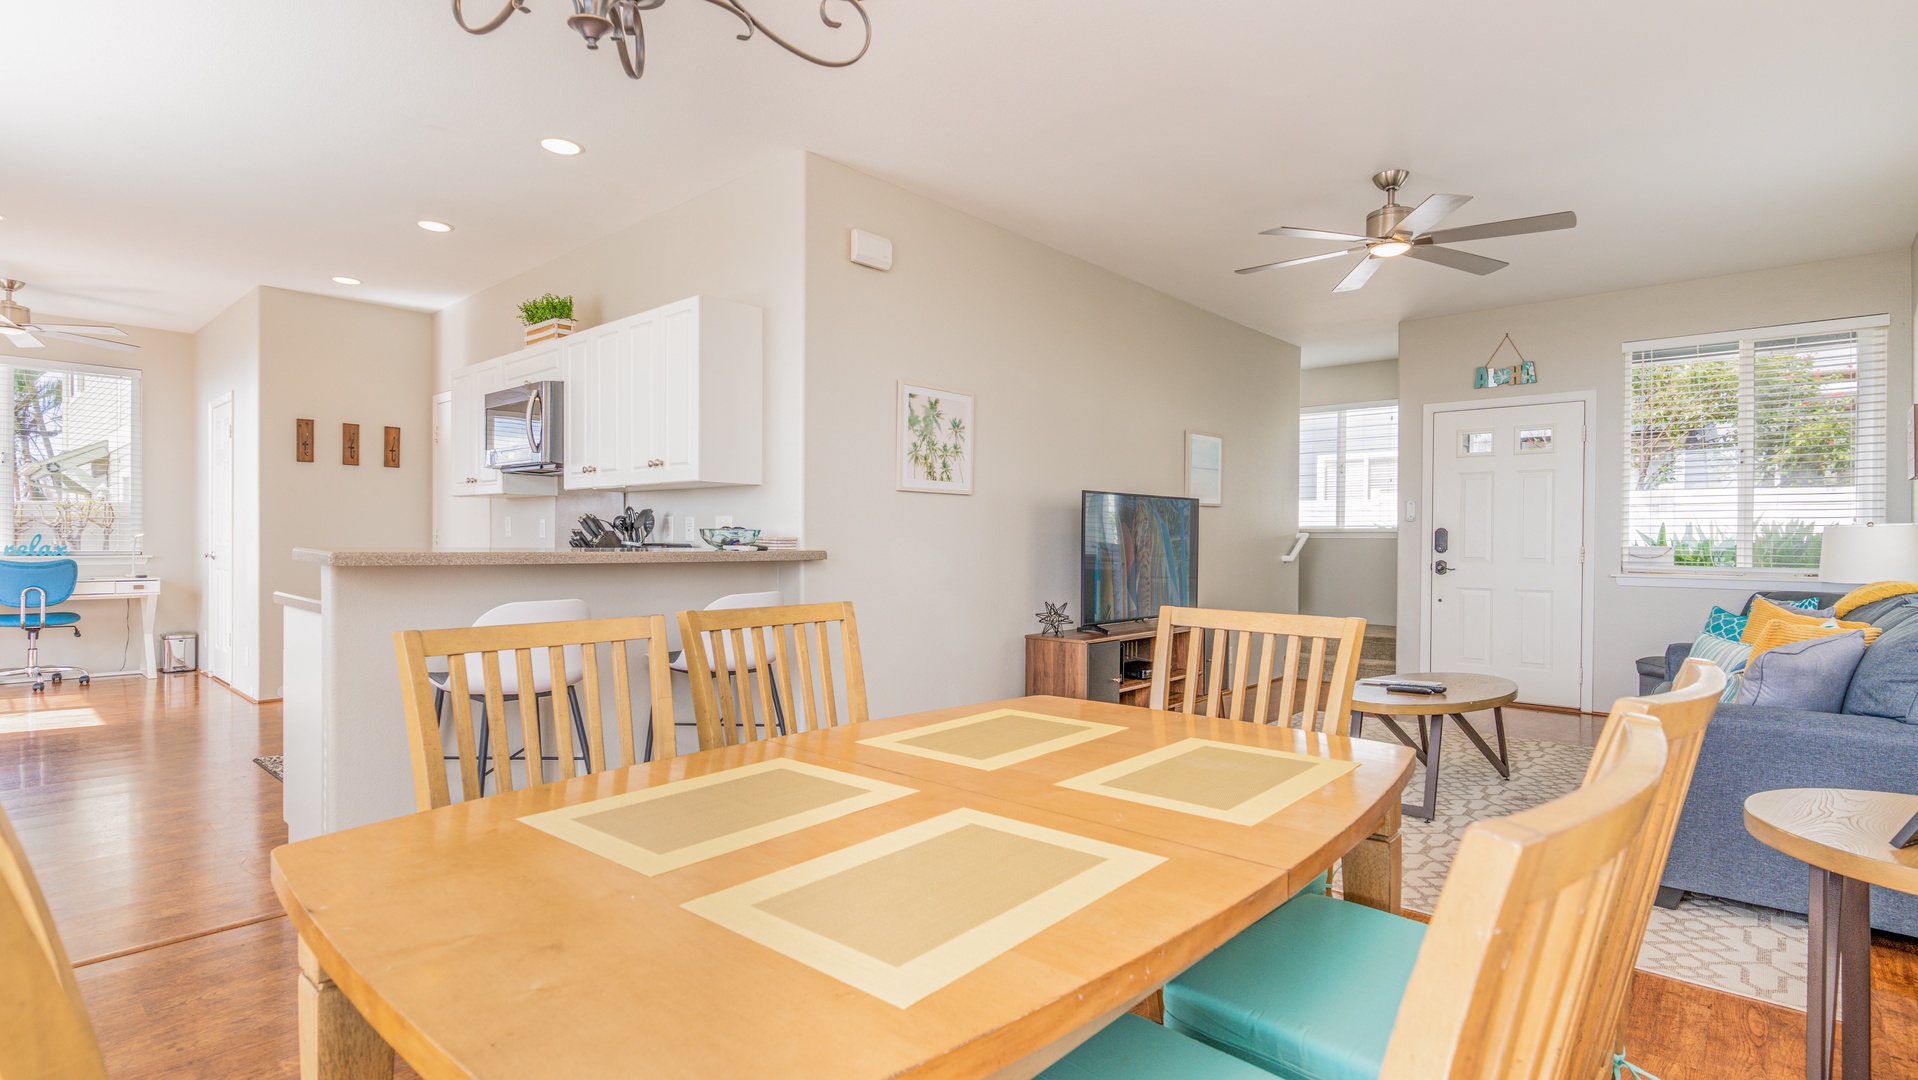 Kapolei Vacation Rentals, Makakilo Elele 48 - Rustic dining table for six.